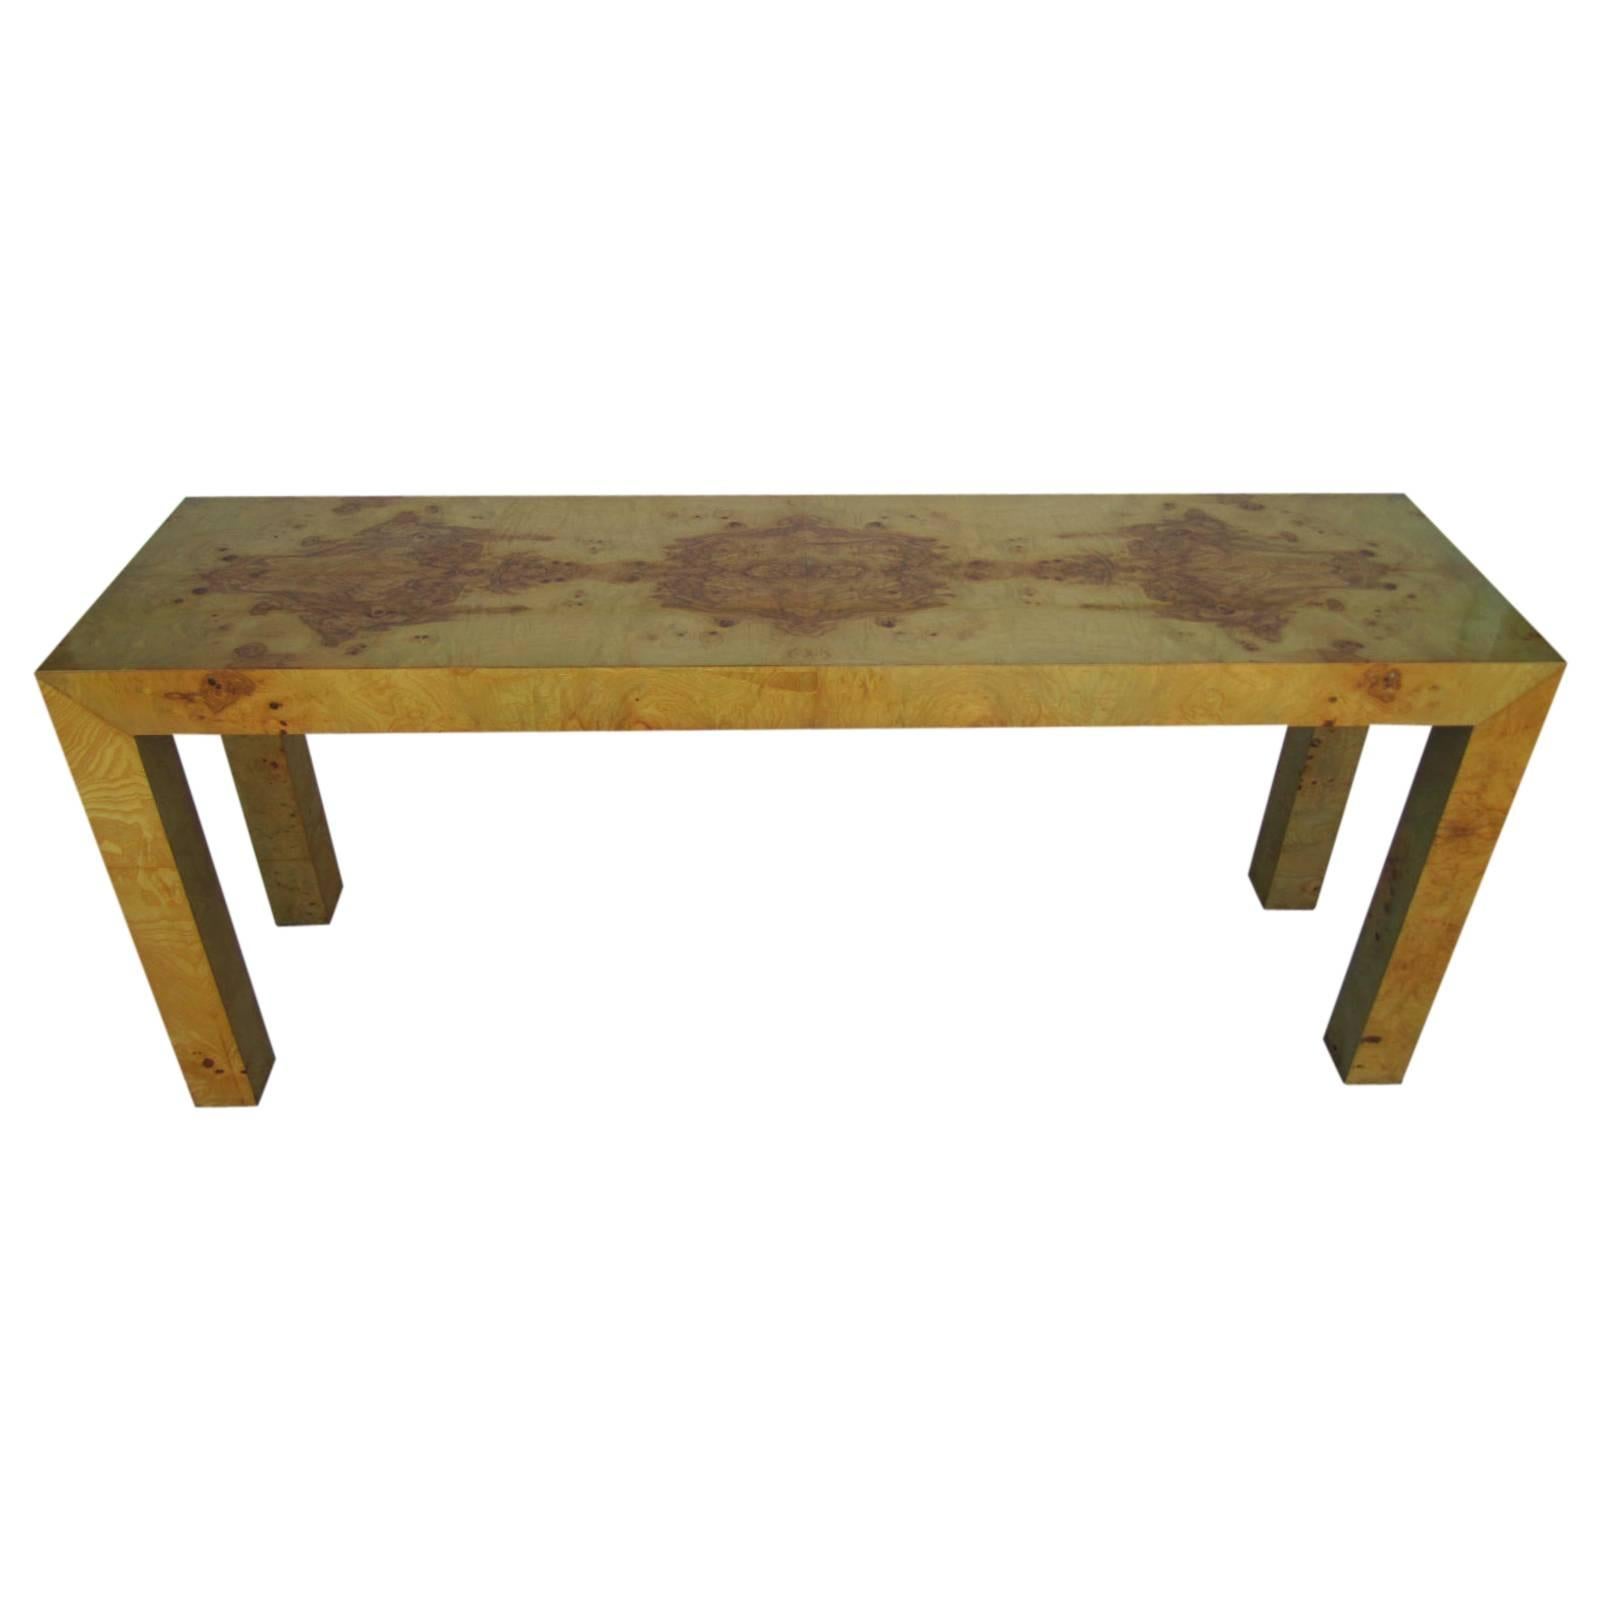  Milo Baughman Burled Olivewood Console Table, Mid-Century Modern